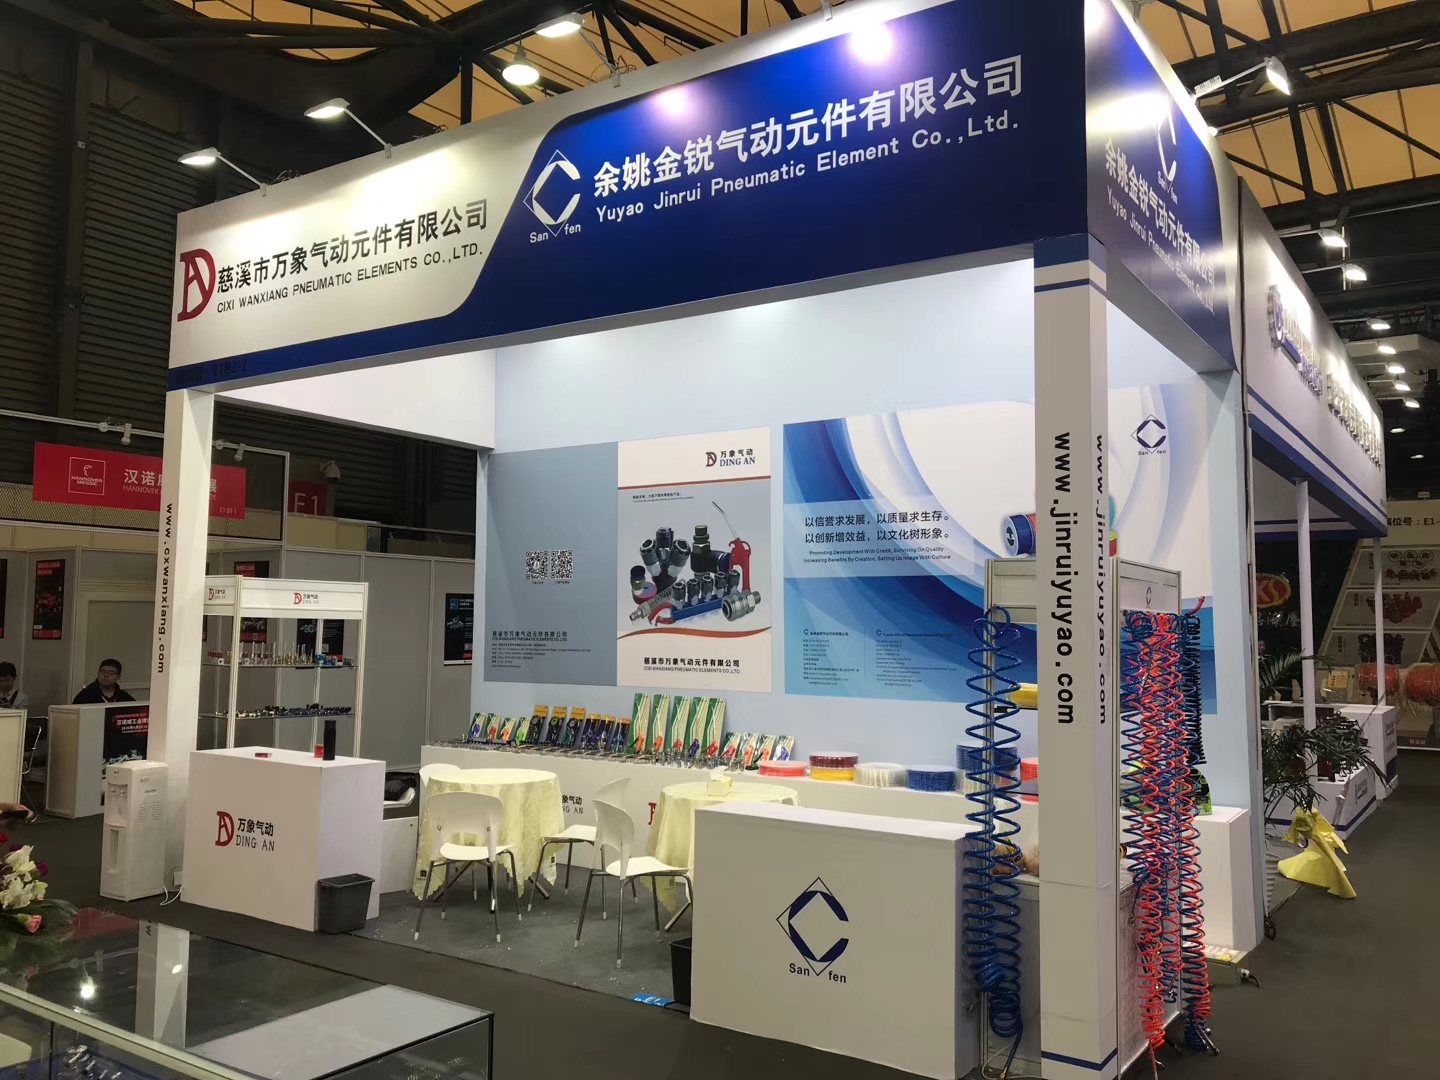 October 23-26, 2019 PTC Asia Power Transmission Exhibition in Shanghai successfully concluded